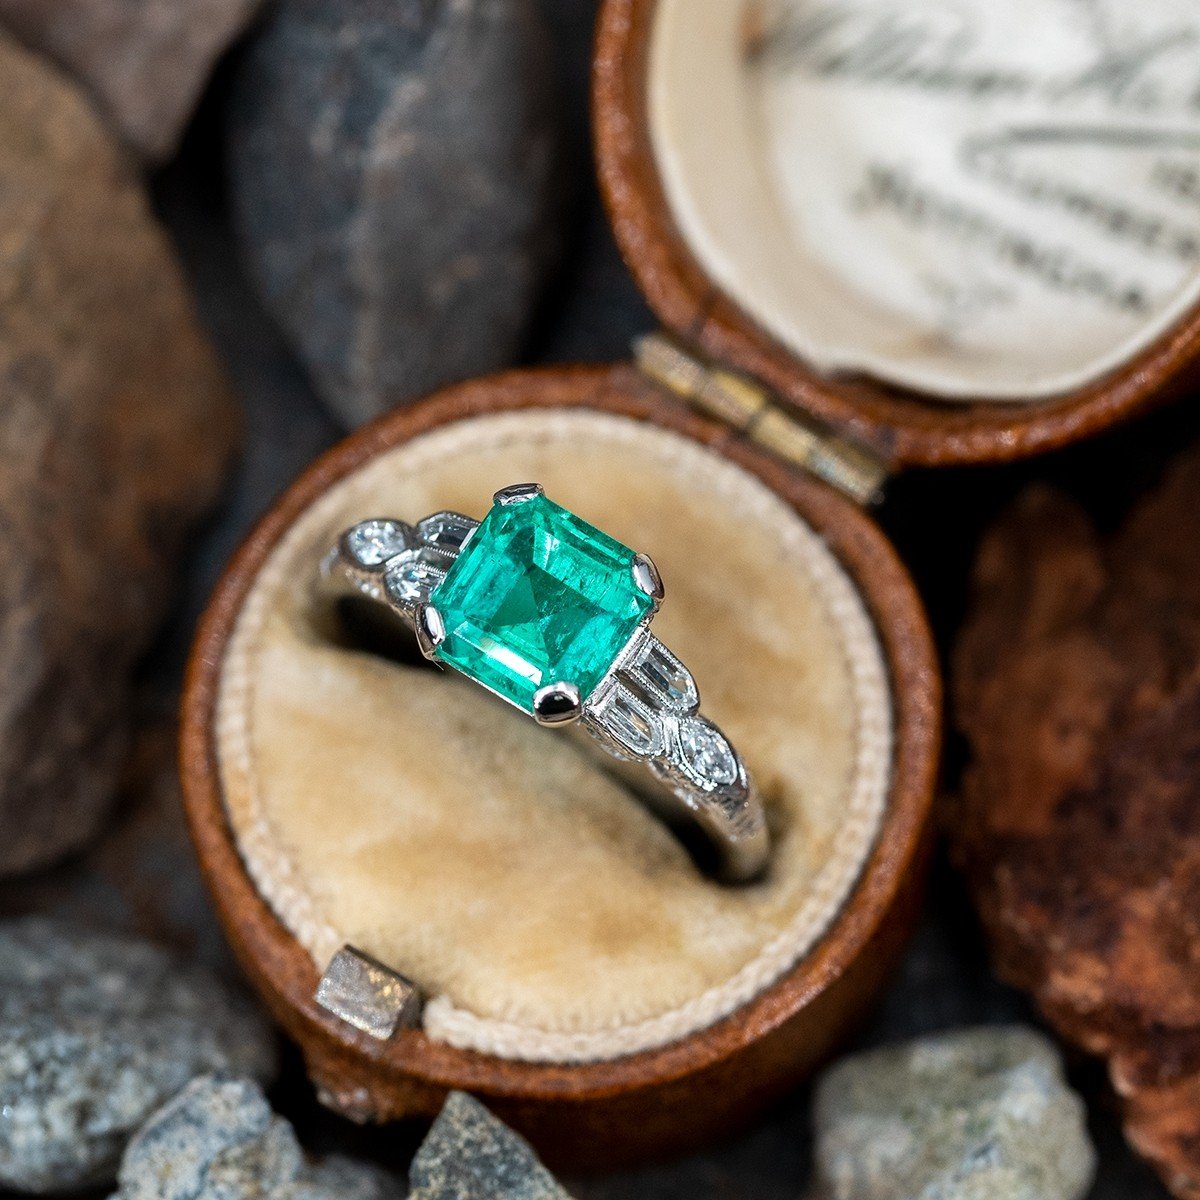 Certified Natural Emerald Ring Weighing 1.60 Carats